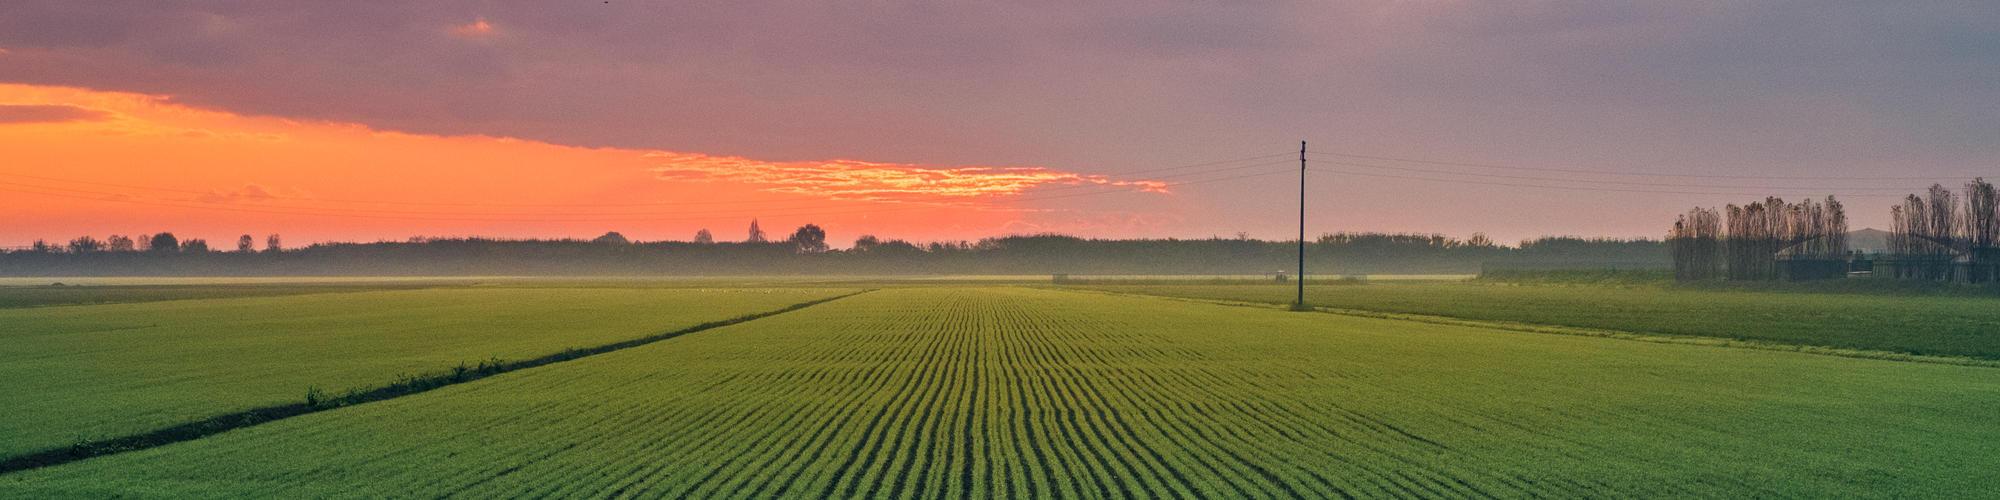 Field at sunset in Po Valley